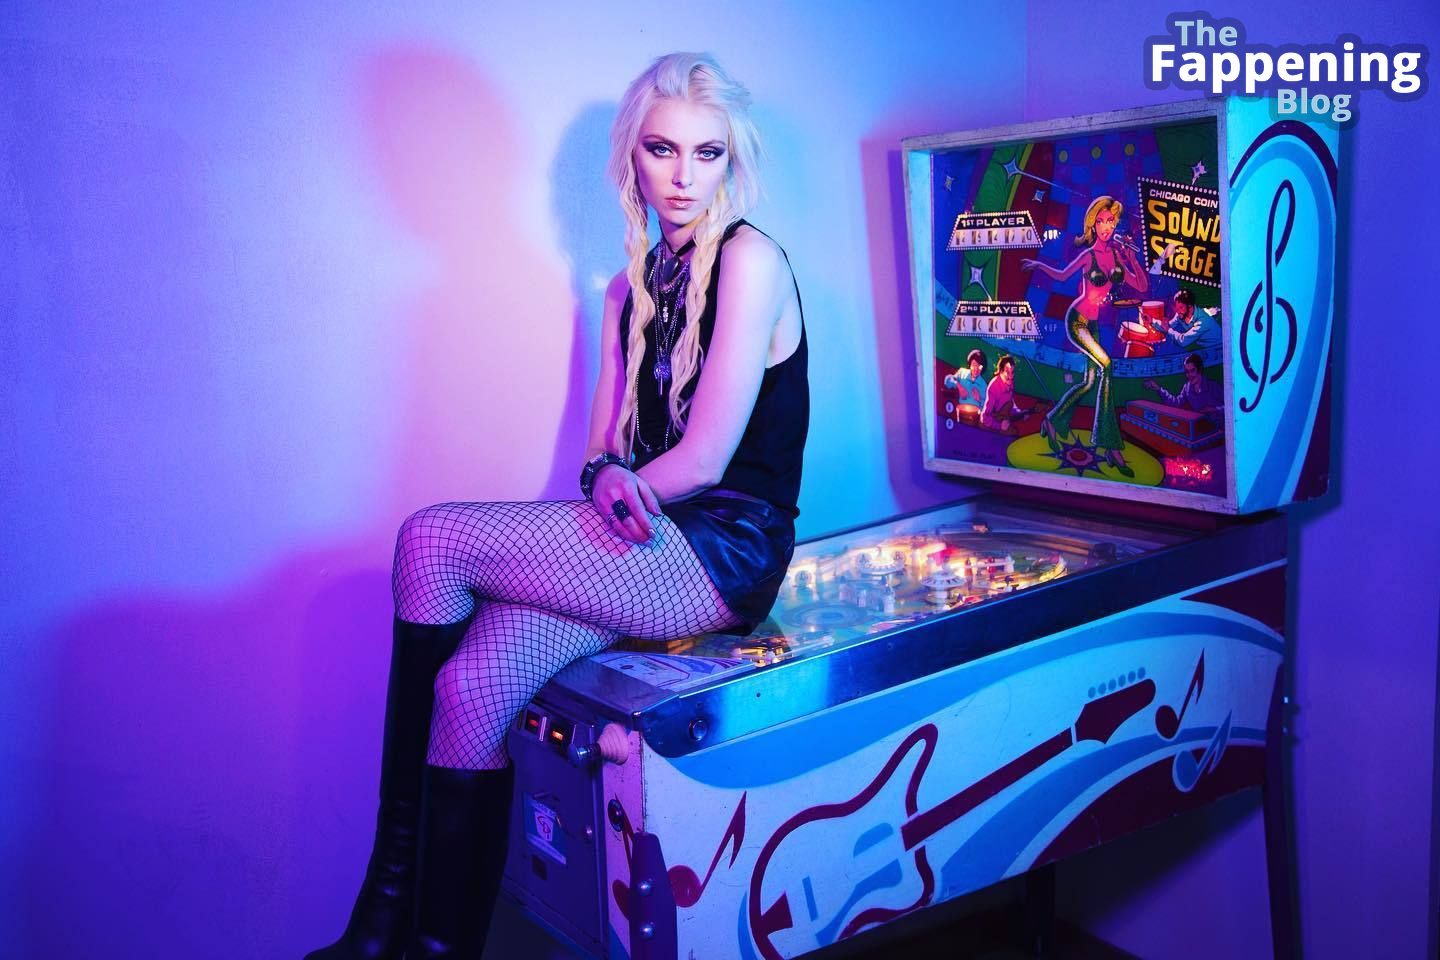 Taylor Momsen Shows Off Her Sexy Legs in a Hot Shoot (5 Photos)